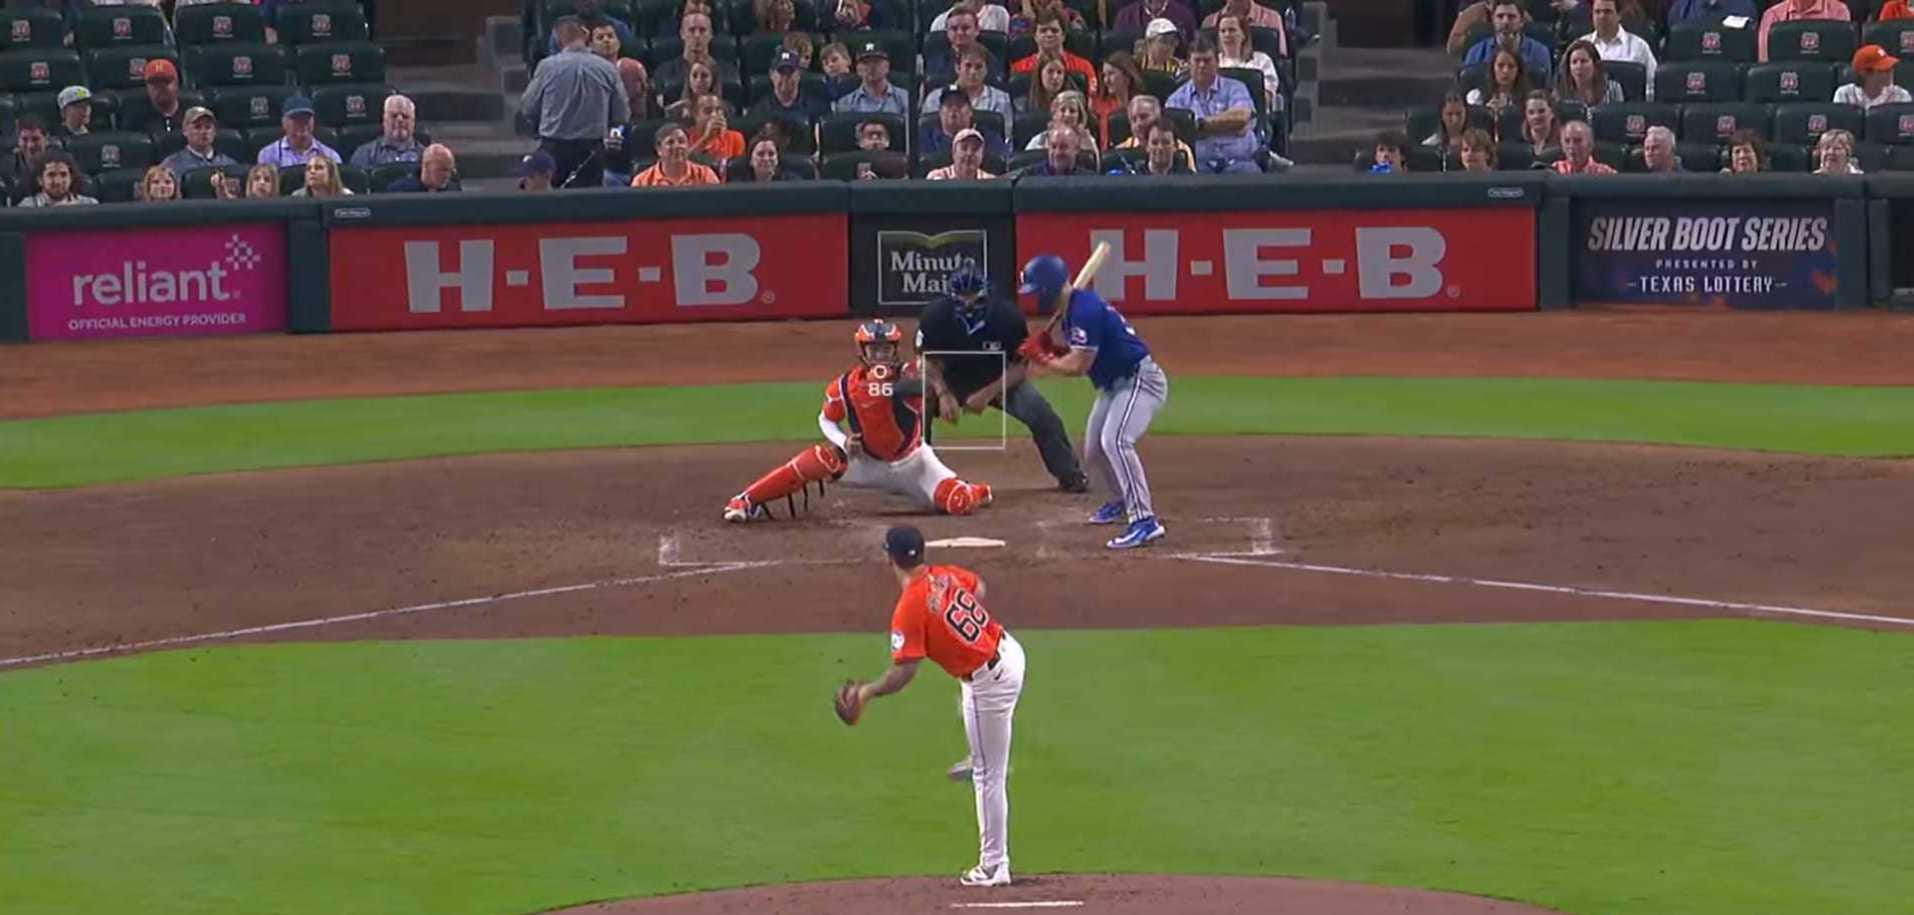 angel hernandez made the worst third strike call and the rangers' broadcast rightfully went ballistic